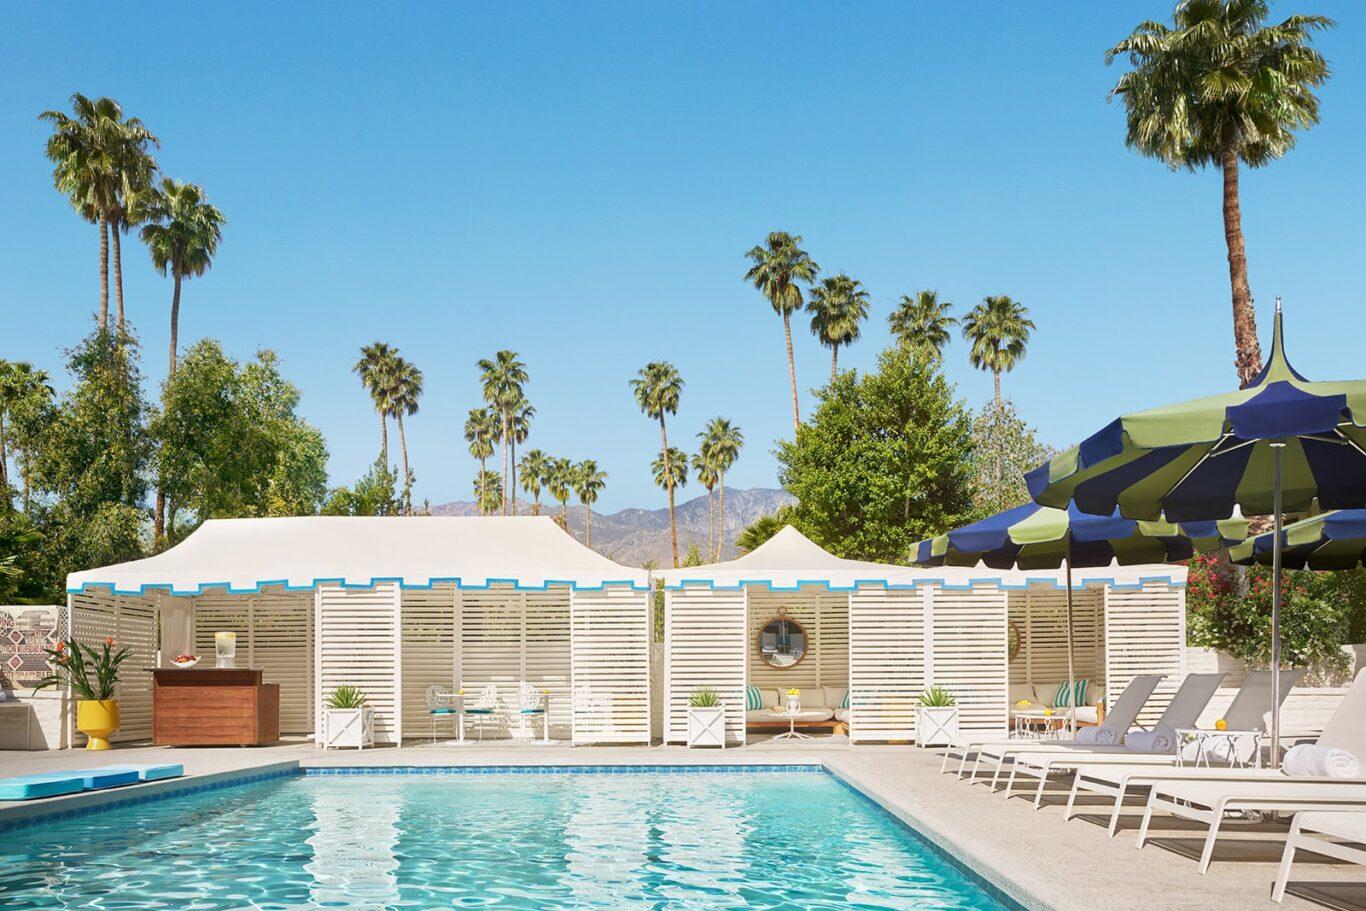 Get a Taste of How the Rich and Famous Live at Palm Springs